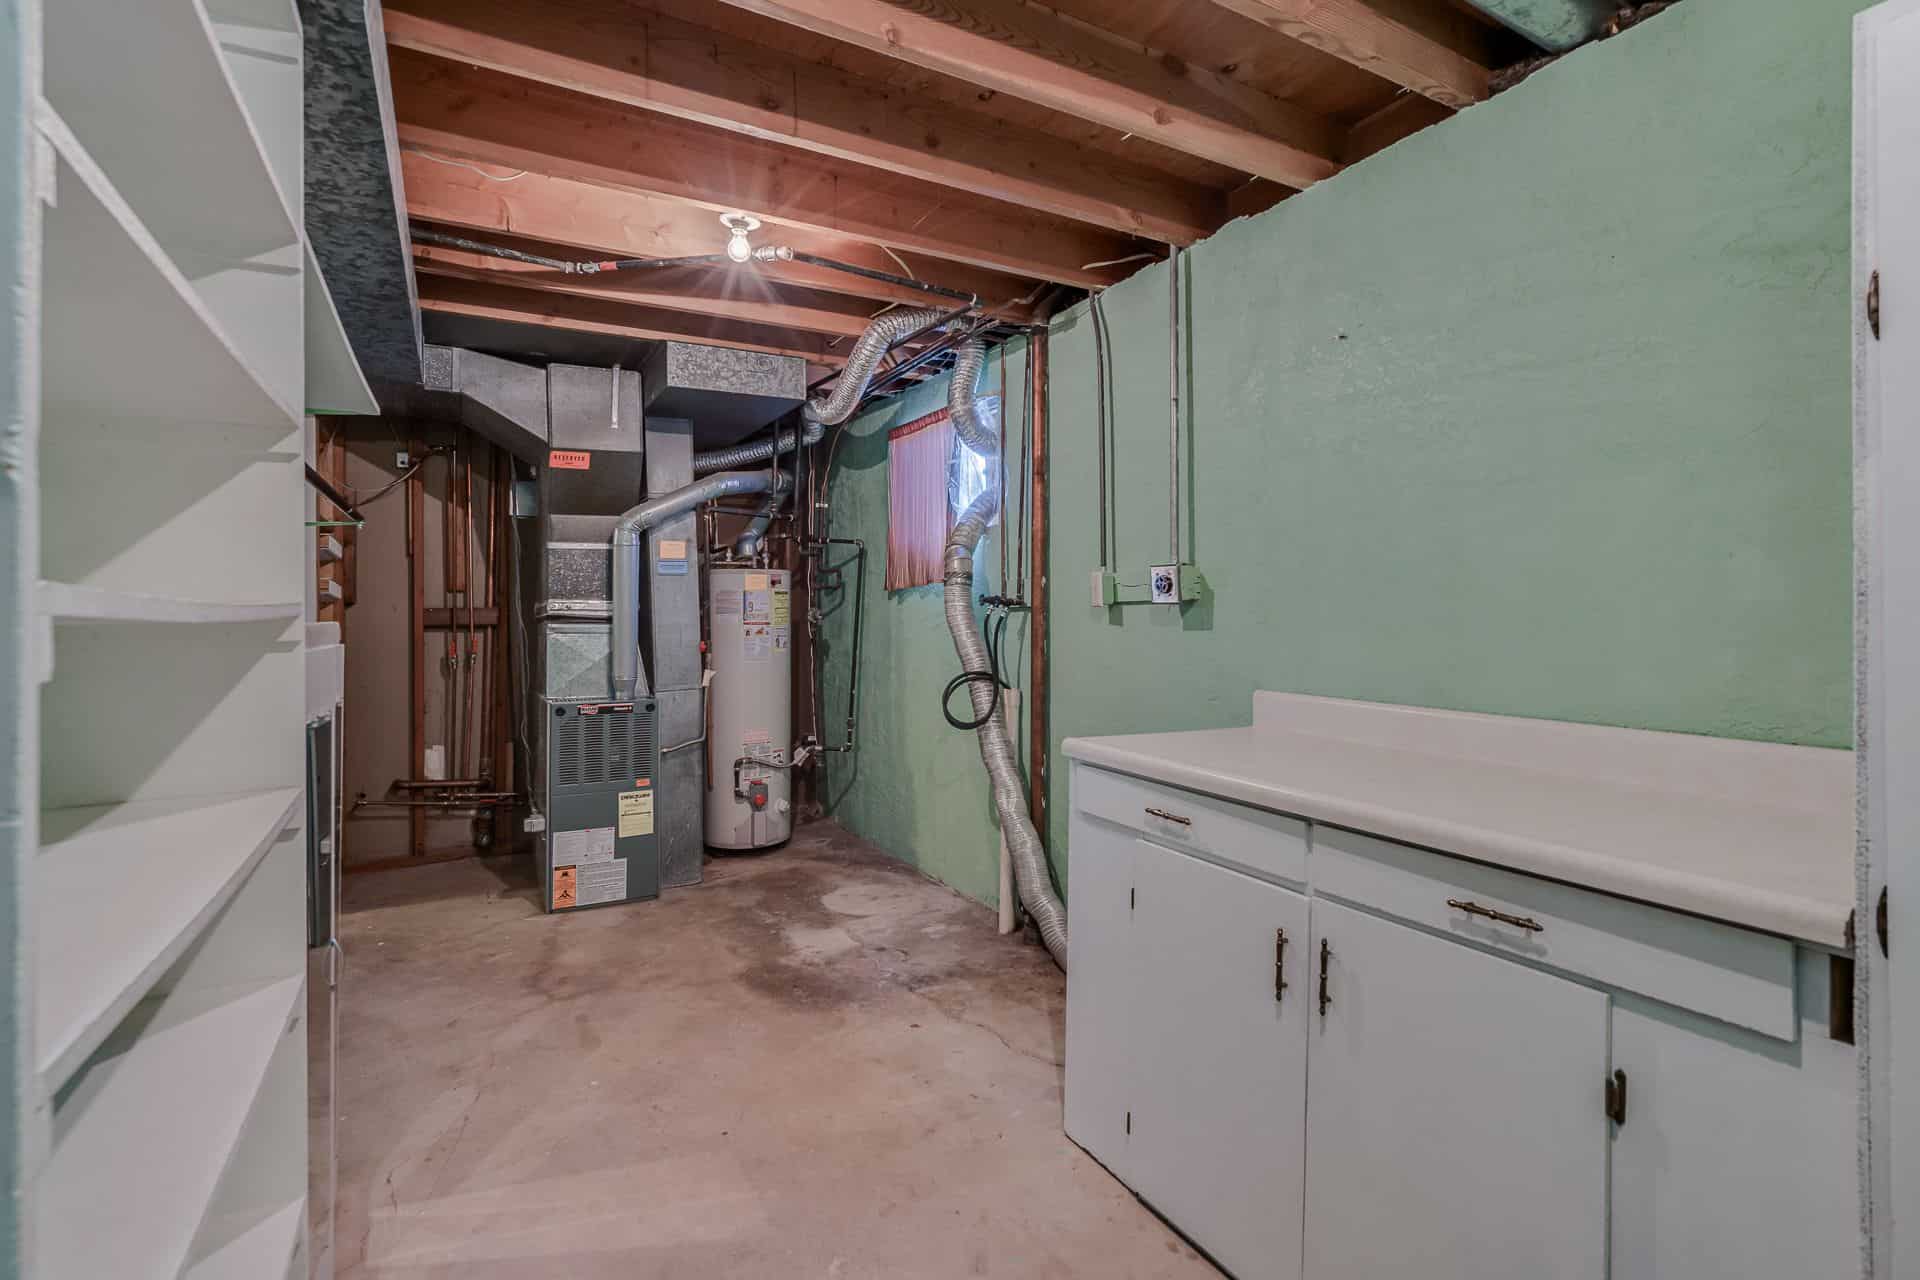 Mechanical and Laundry Room